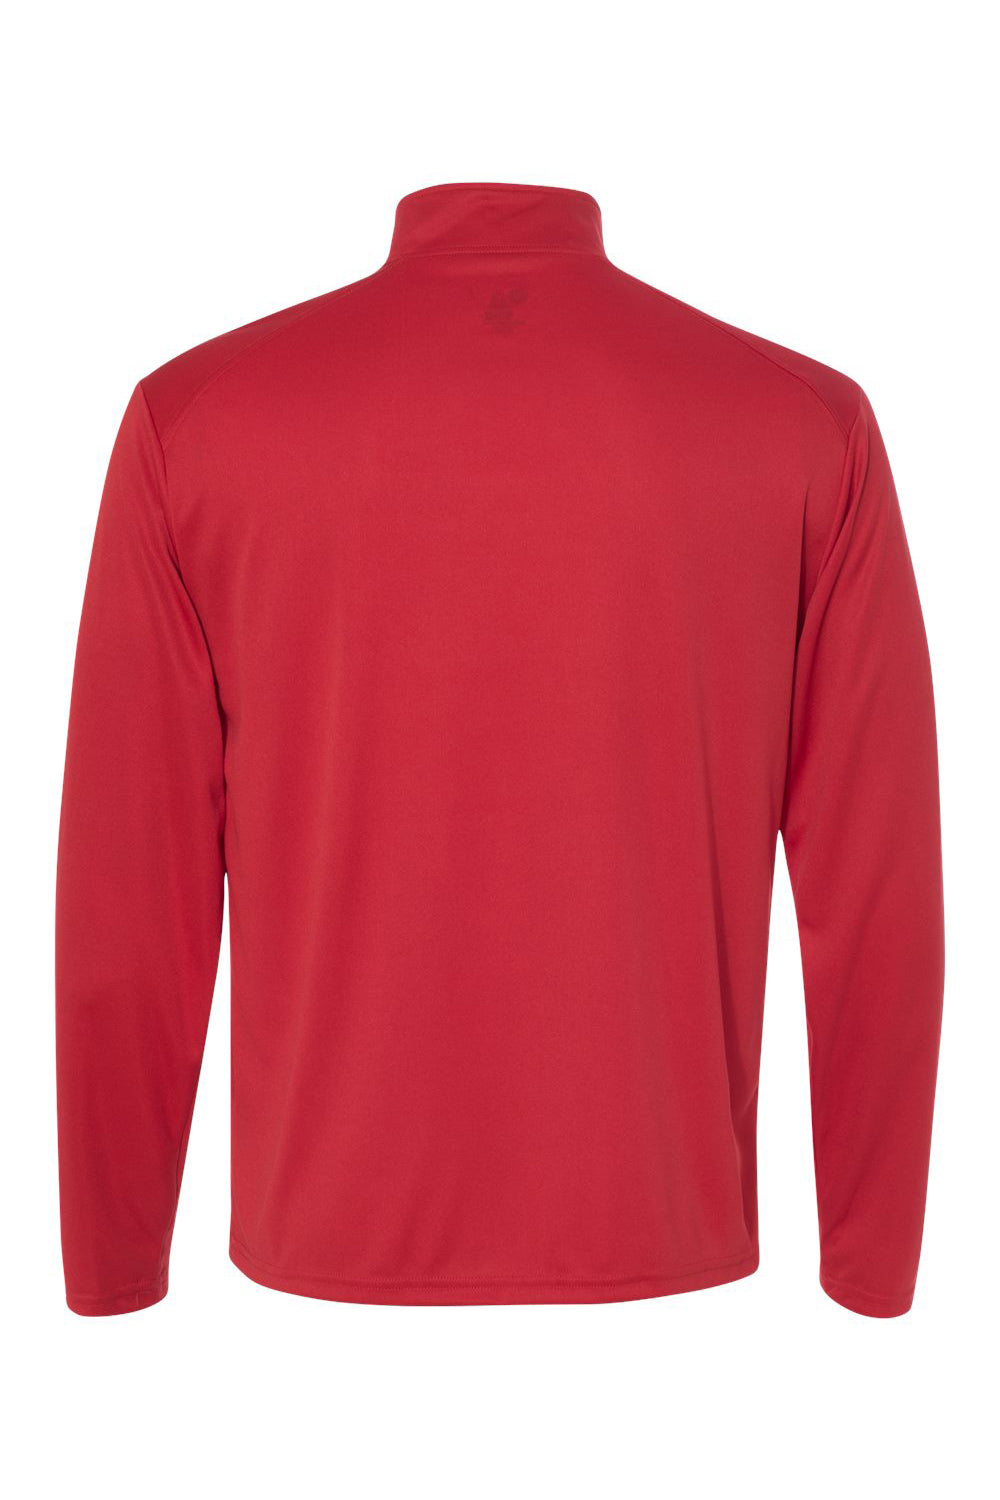 Badger 4102 Mens B-Core Moisture Wicking 1/4 Zip Pullover Red/Graphite Grey Flat Back